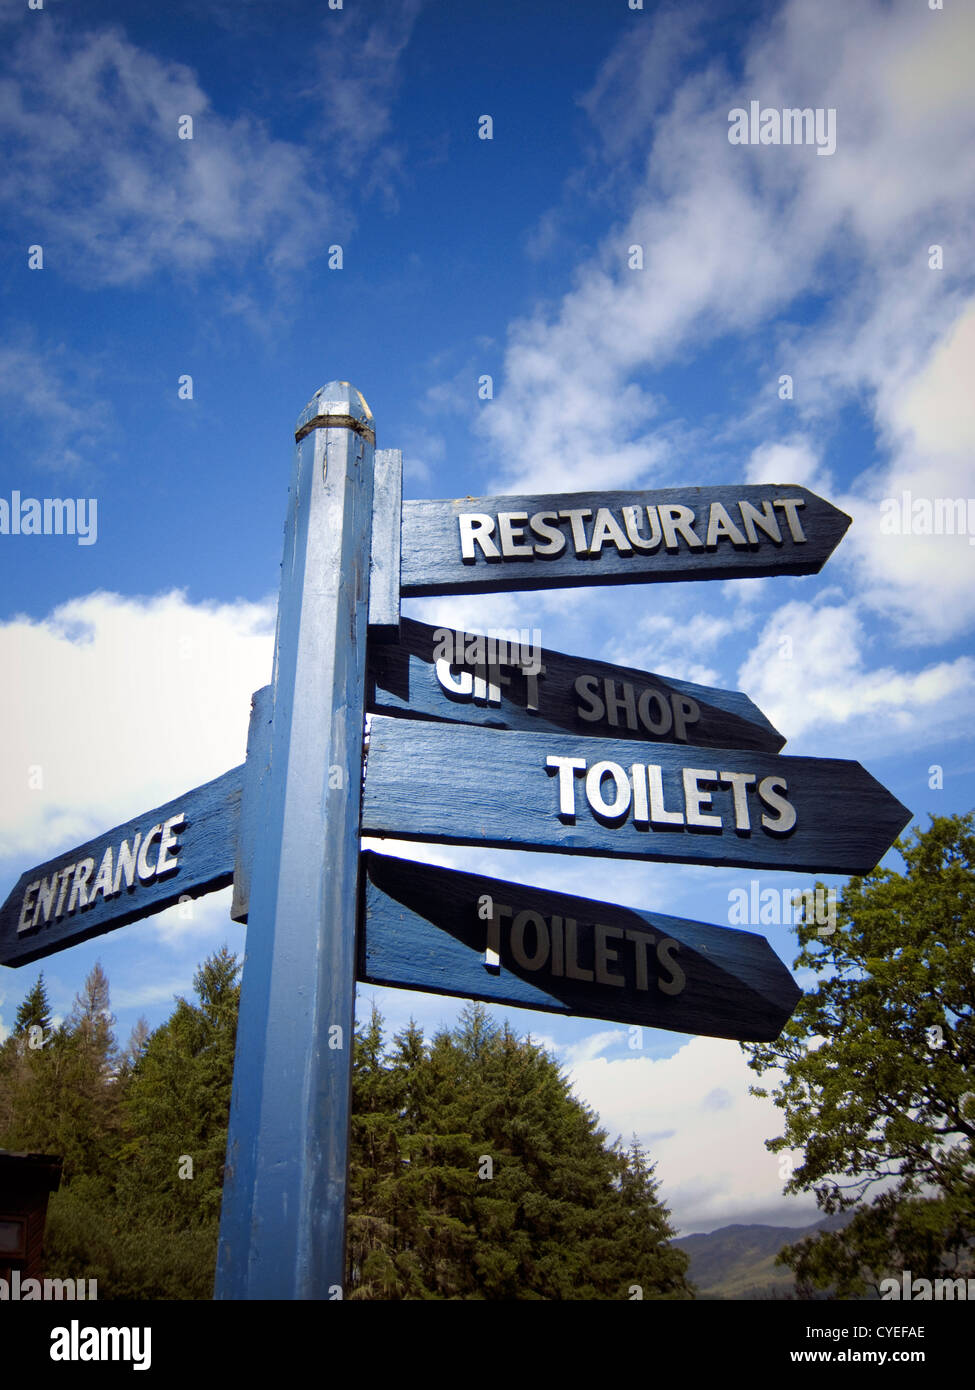 Signage at a visitor attraction Stock Photo